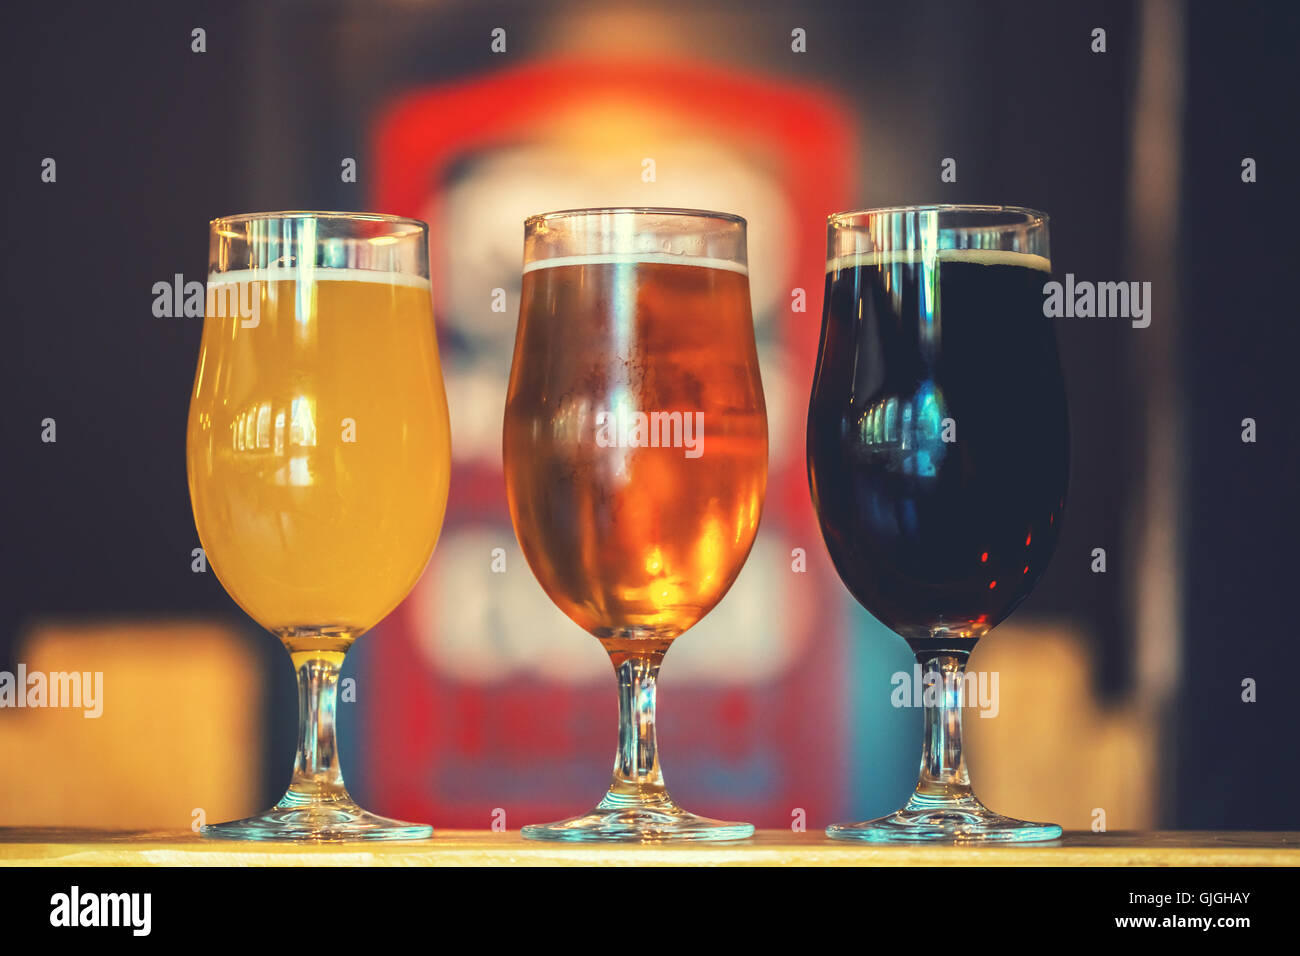 Beautiful background of the Oktoberfest. Glasses of cold fresh white, light and dark beer on the wooden bar counter in the pub. Stock Photo